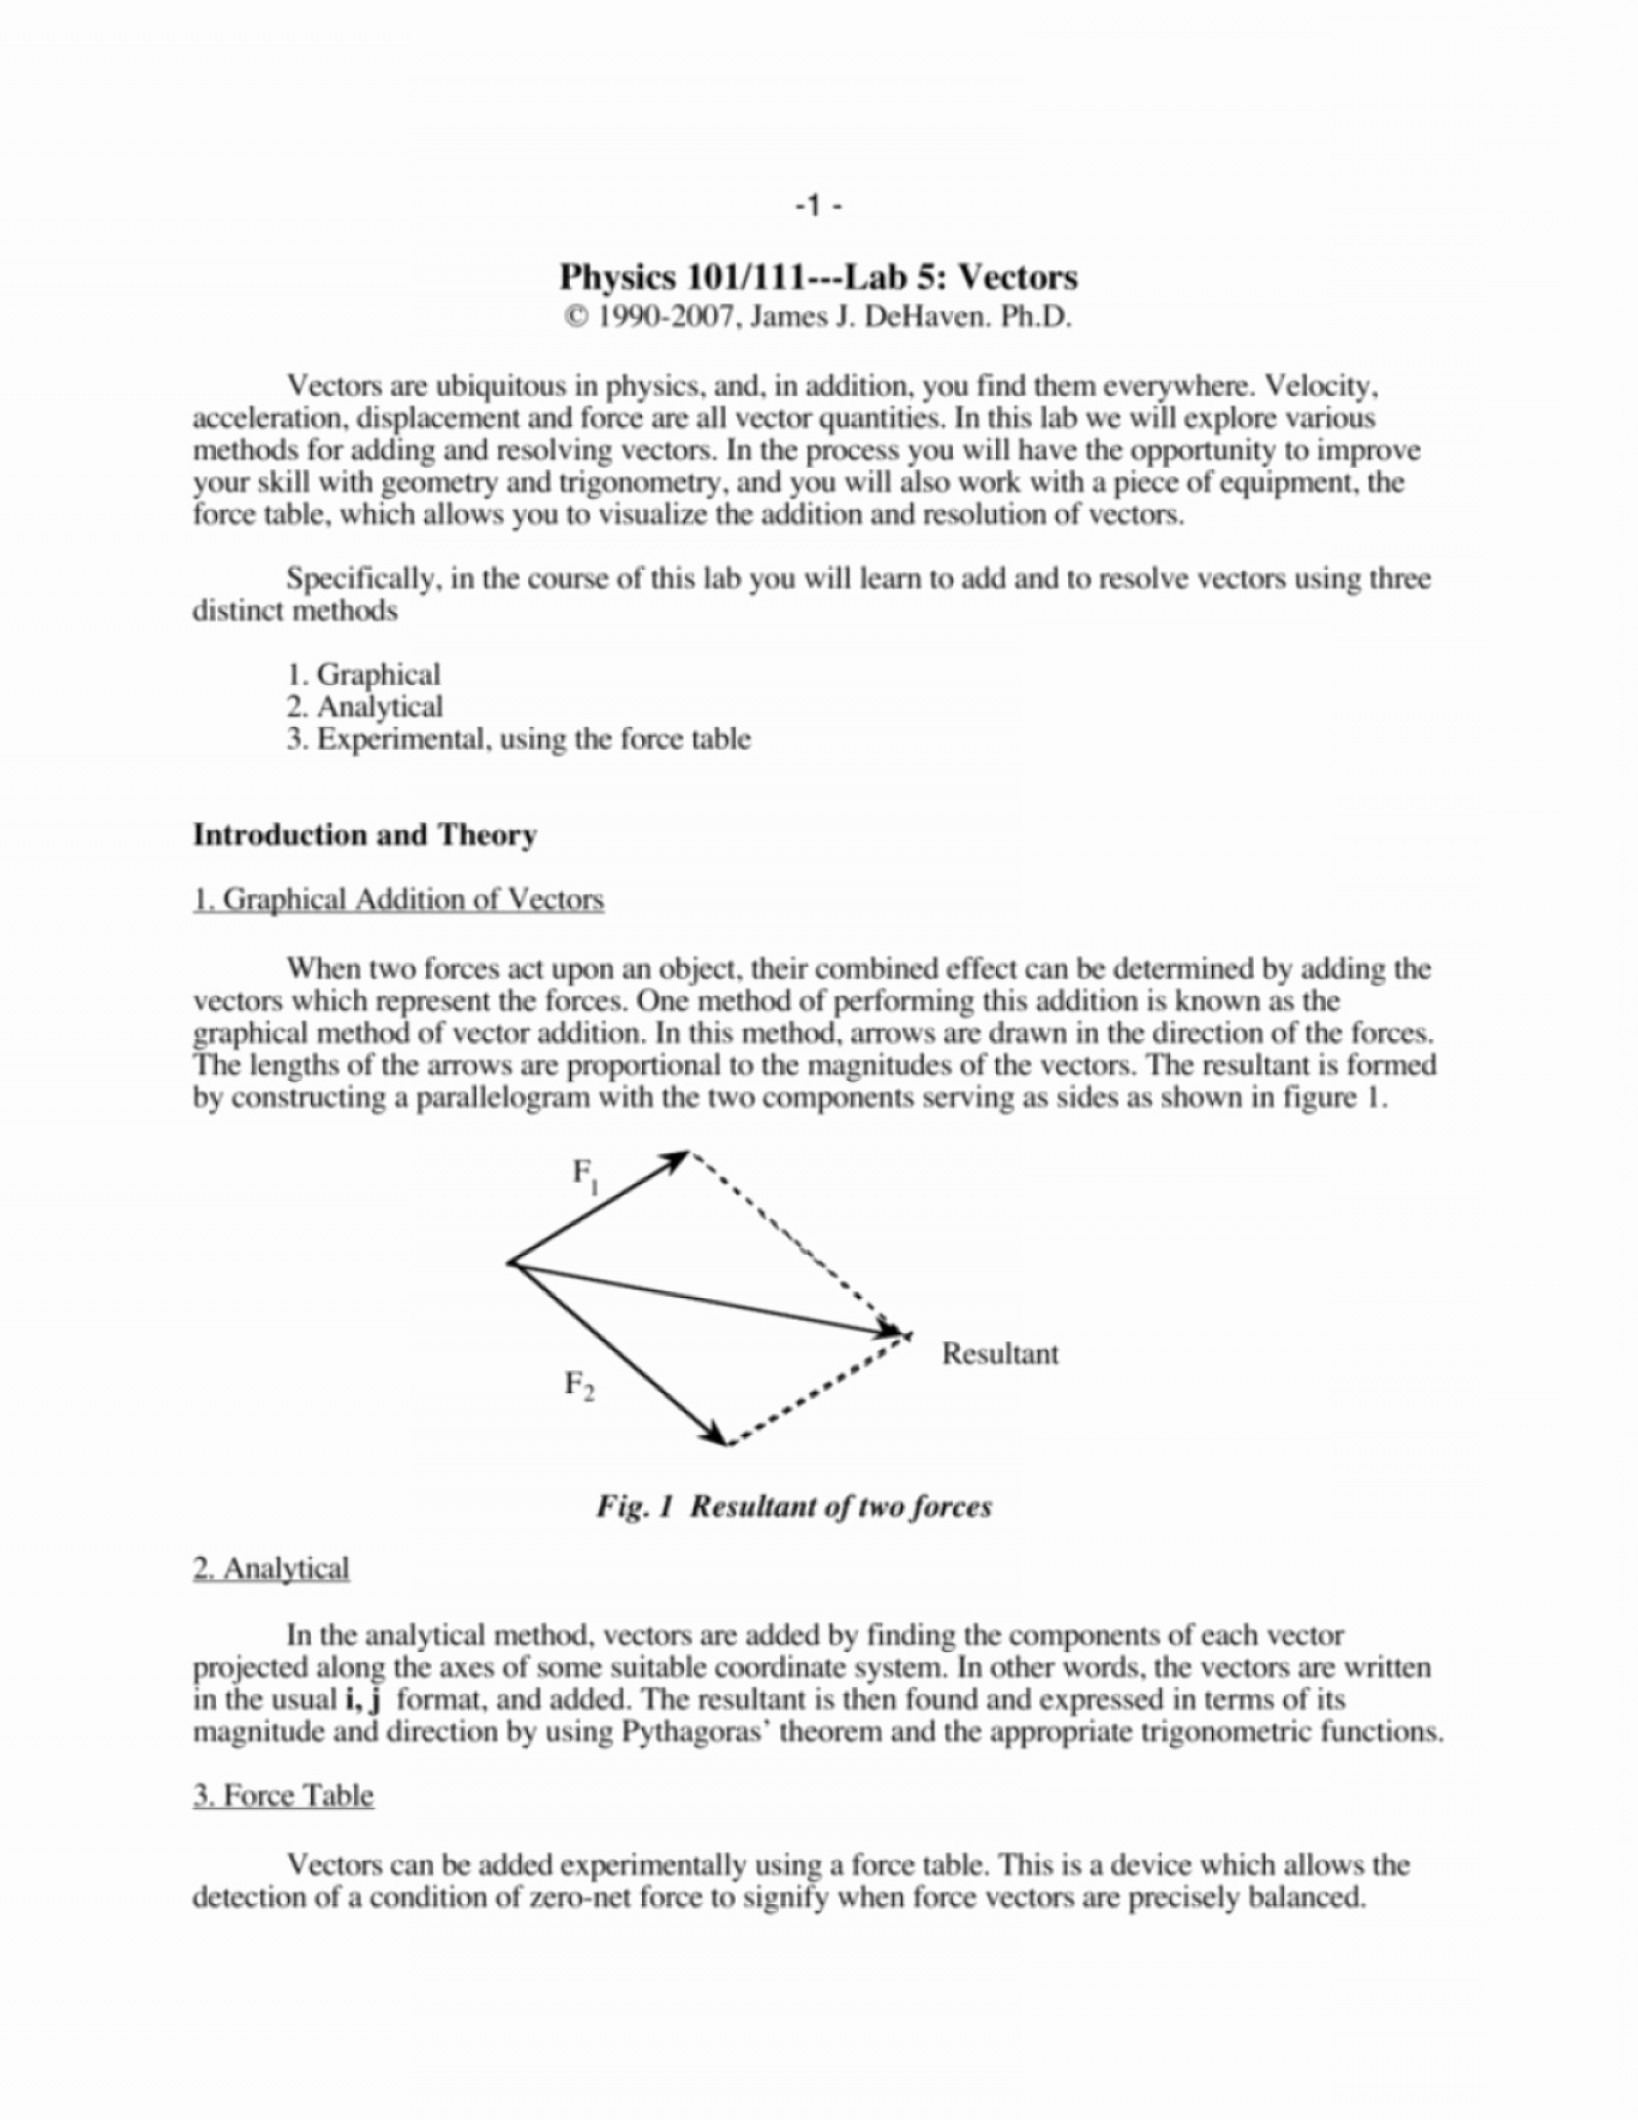 physics-laboratory-worksheet-in-vector-addition-answers